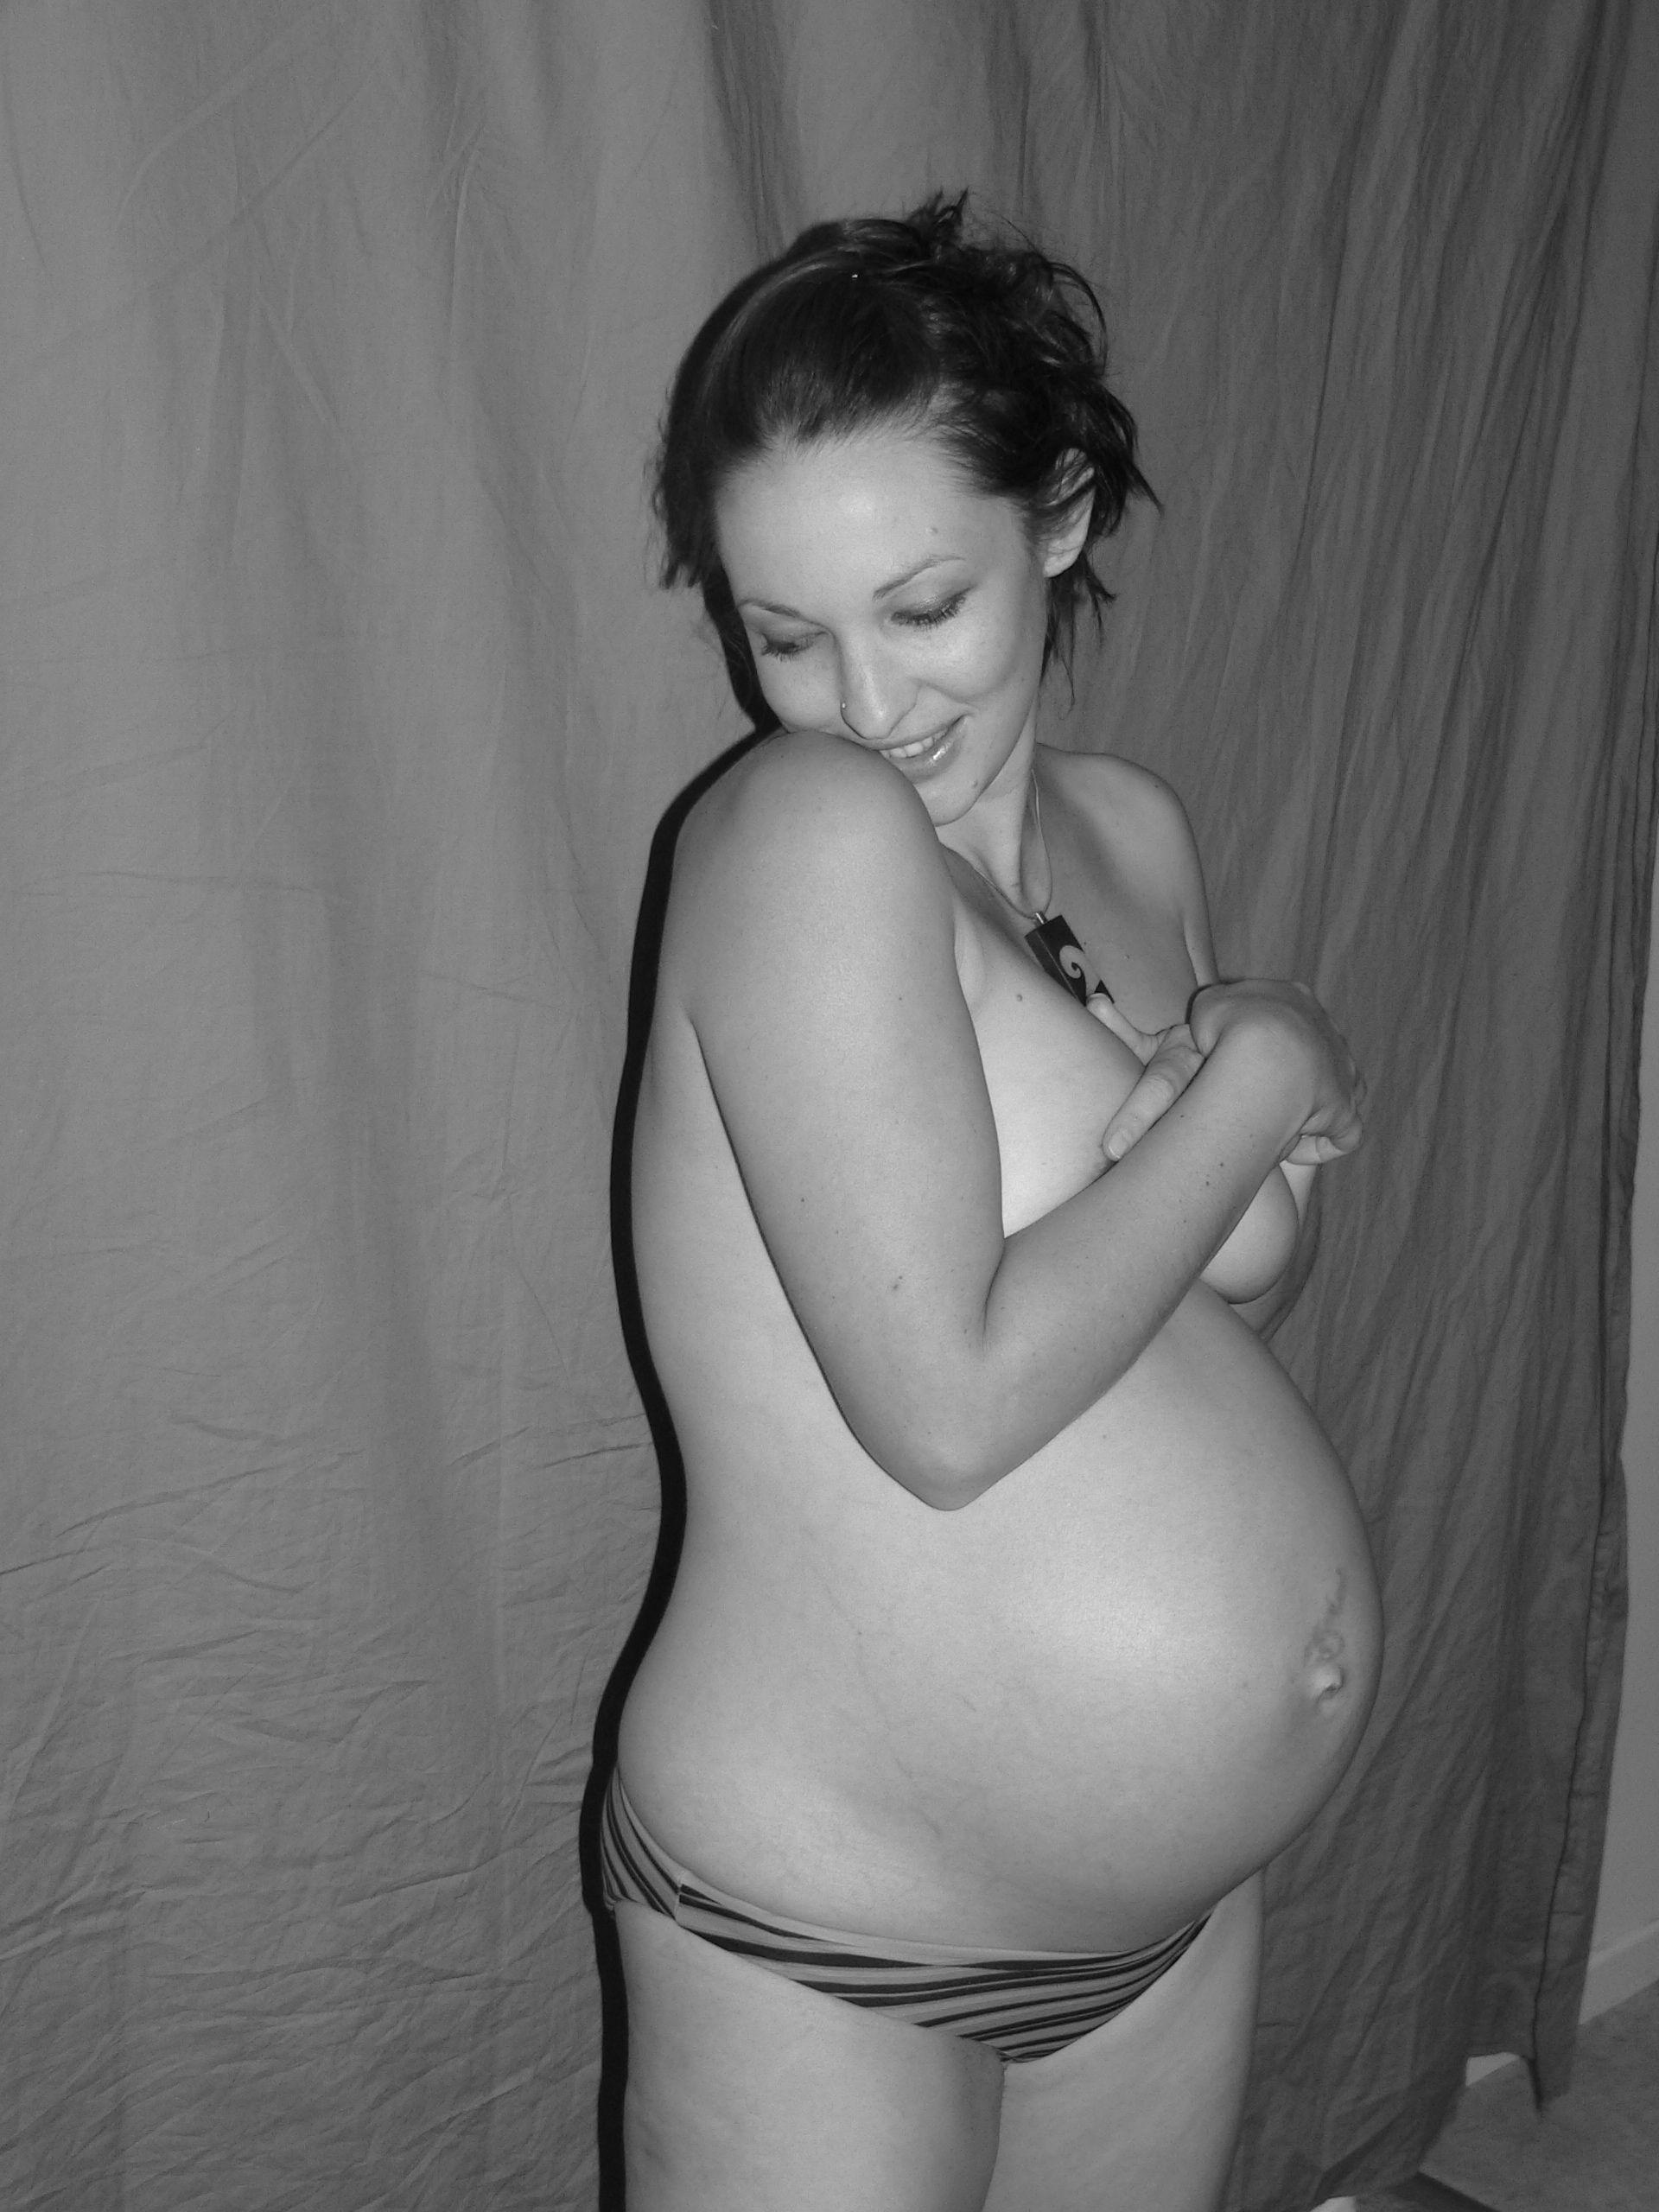 Vintage Nudist Pregnant - Black And White Nudes Pregnant | Sex Pictures Pass